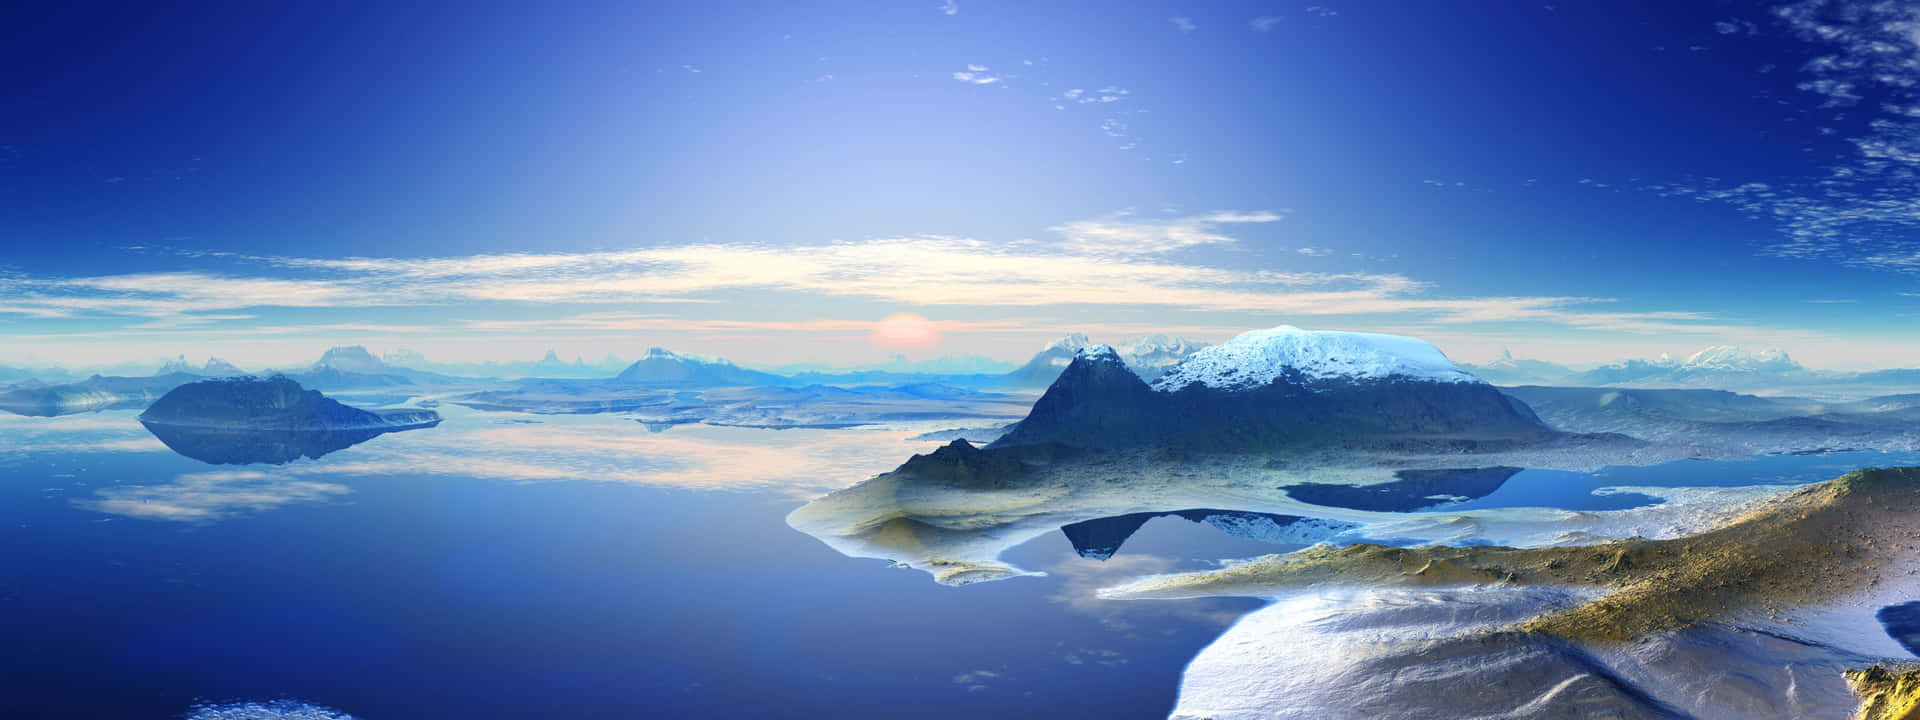 Waters Surrounding Mountains As A Panoramic Desktop Background